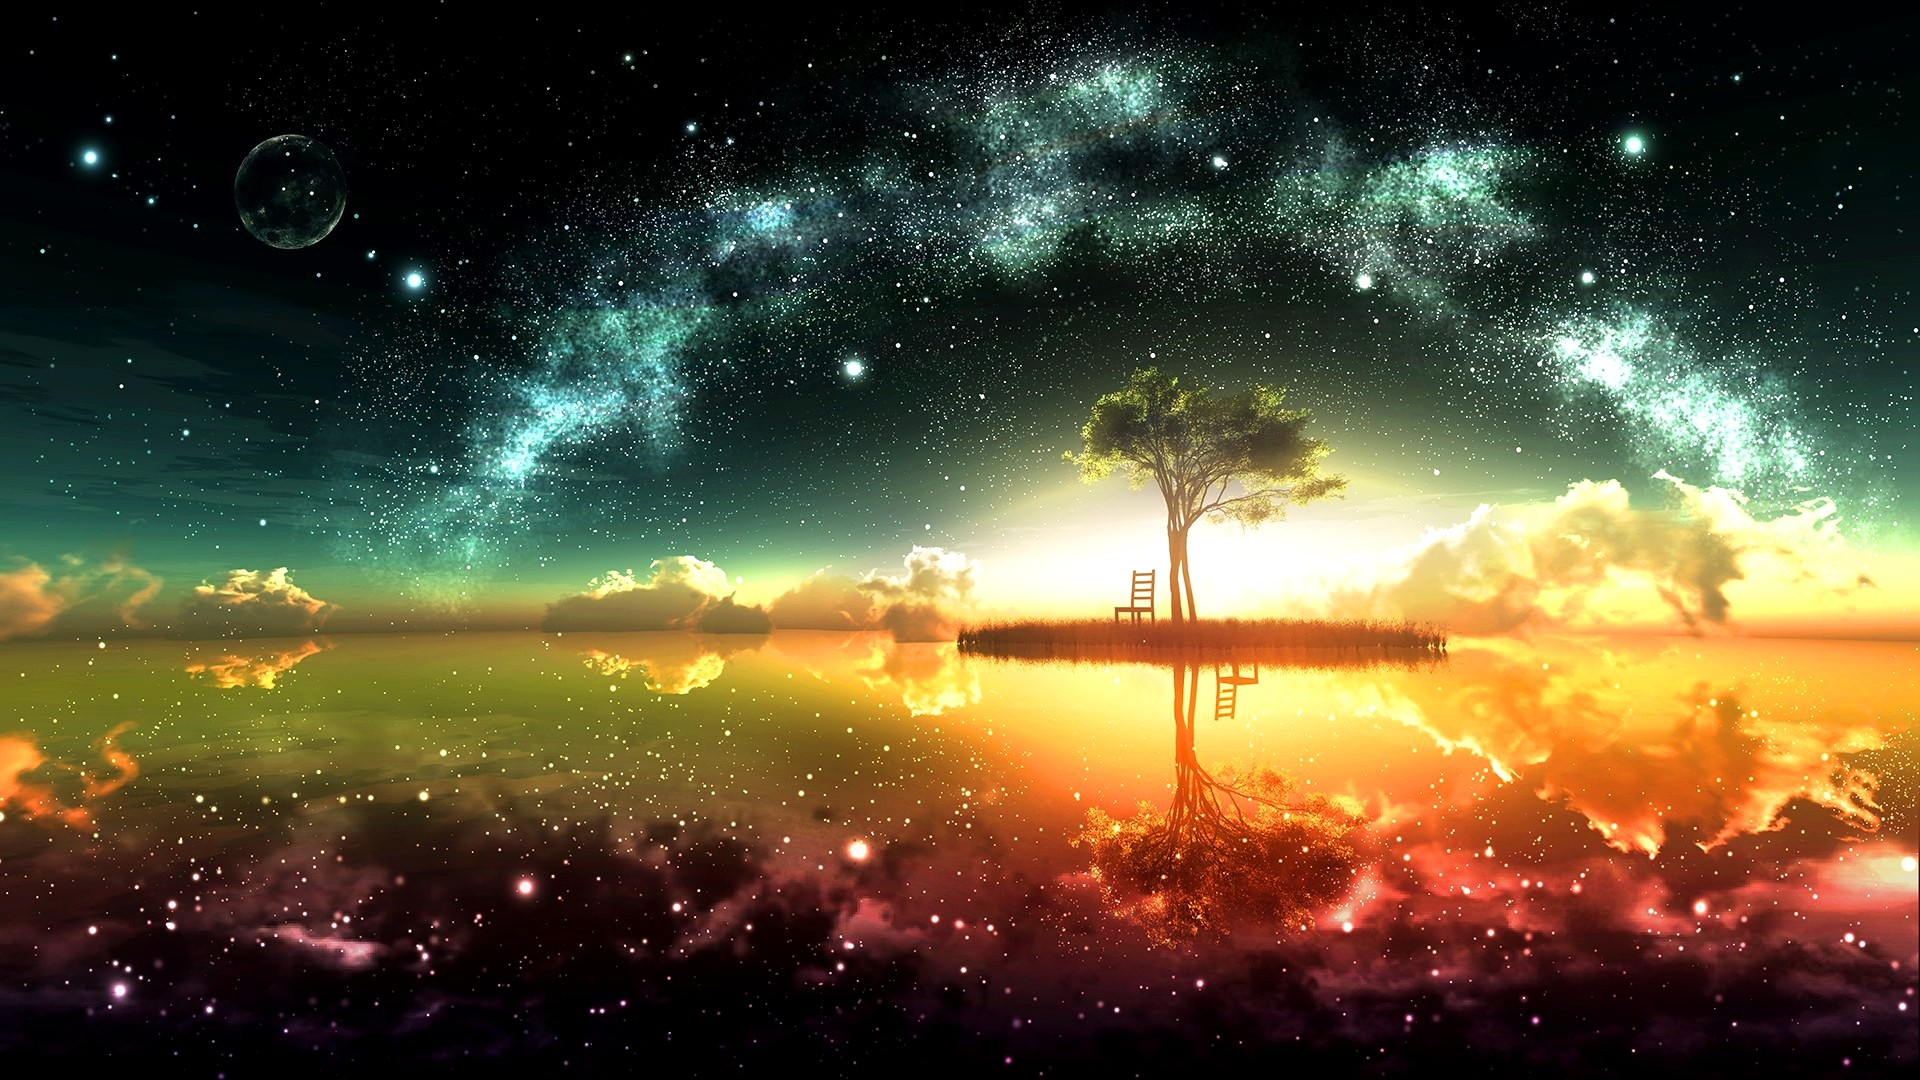 1920x1080 Surreal Space Wallpaper High Definition, High Resolution HD Wallpapers : High Definition, High Resolution HD Wallpapers